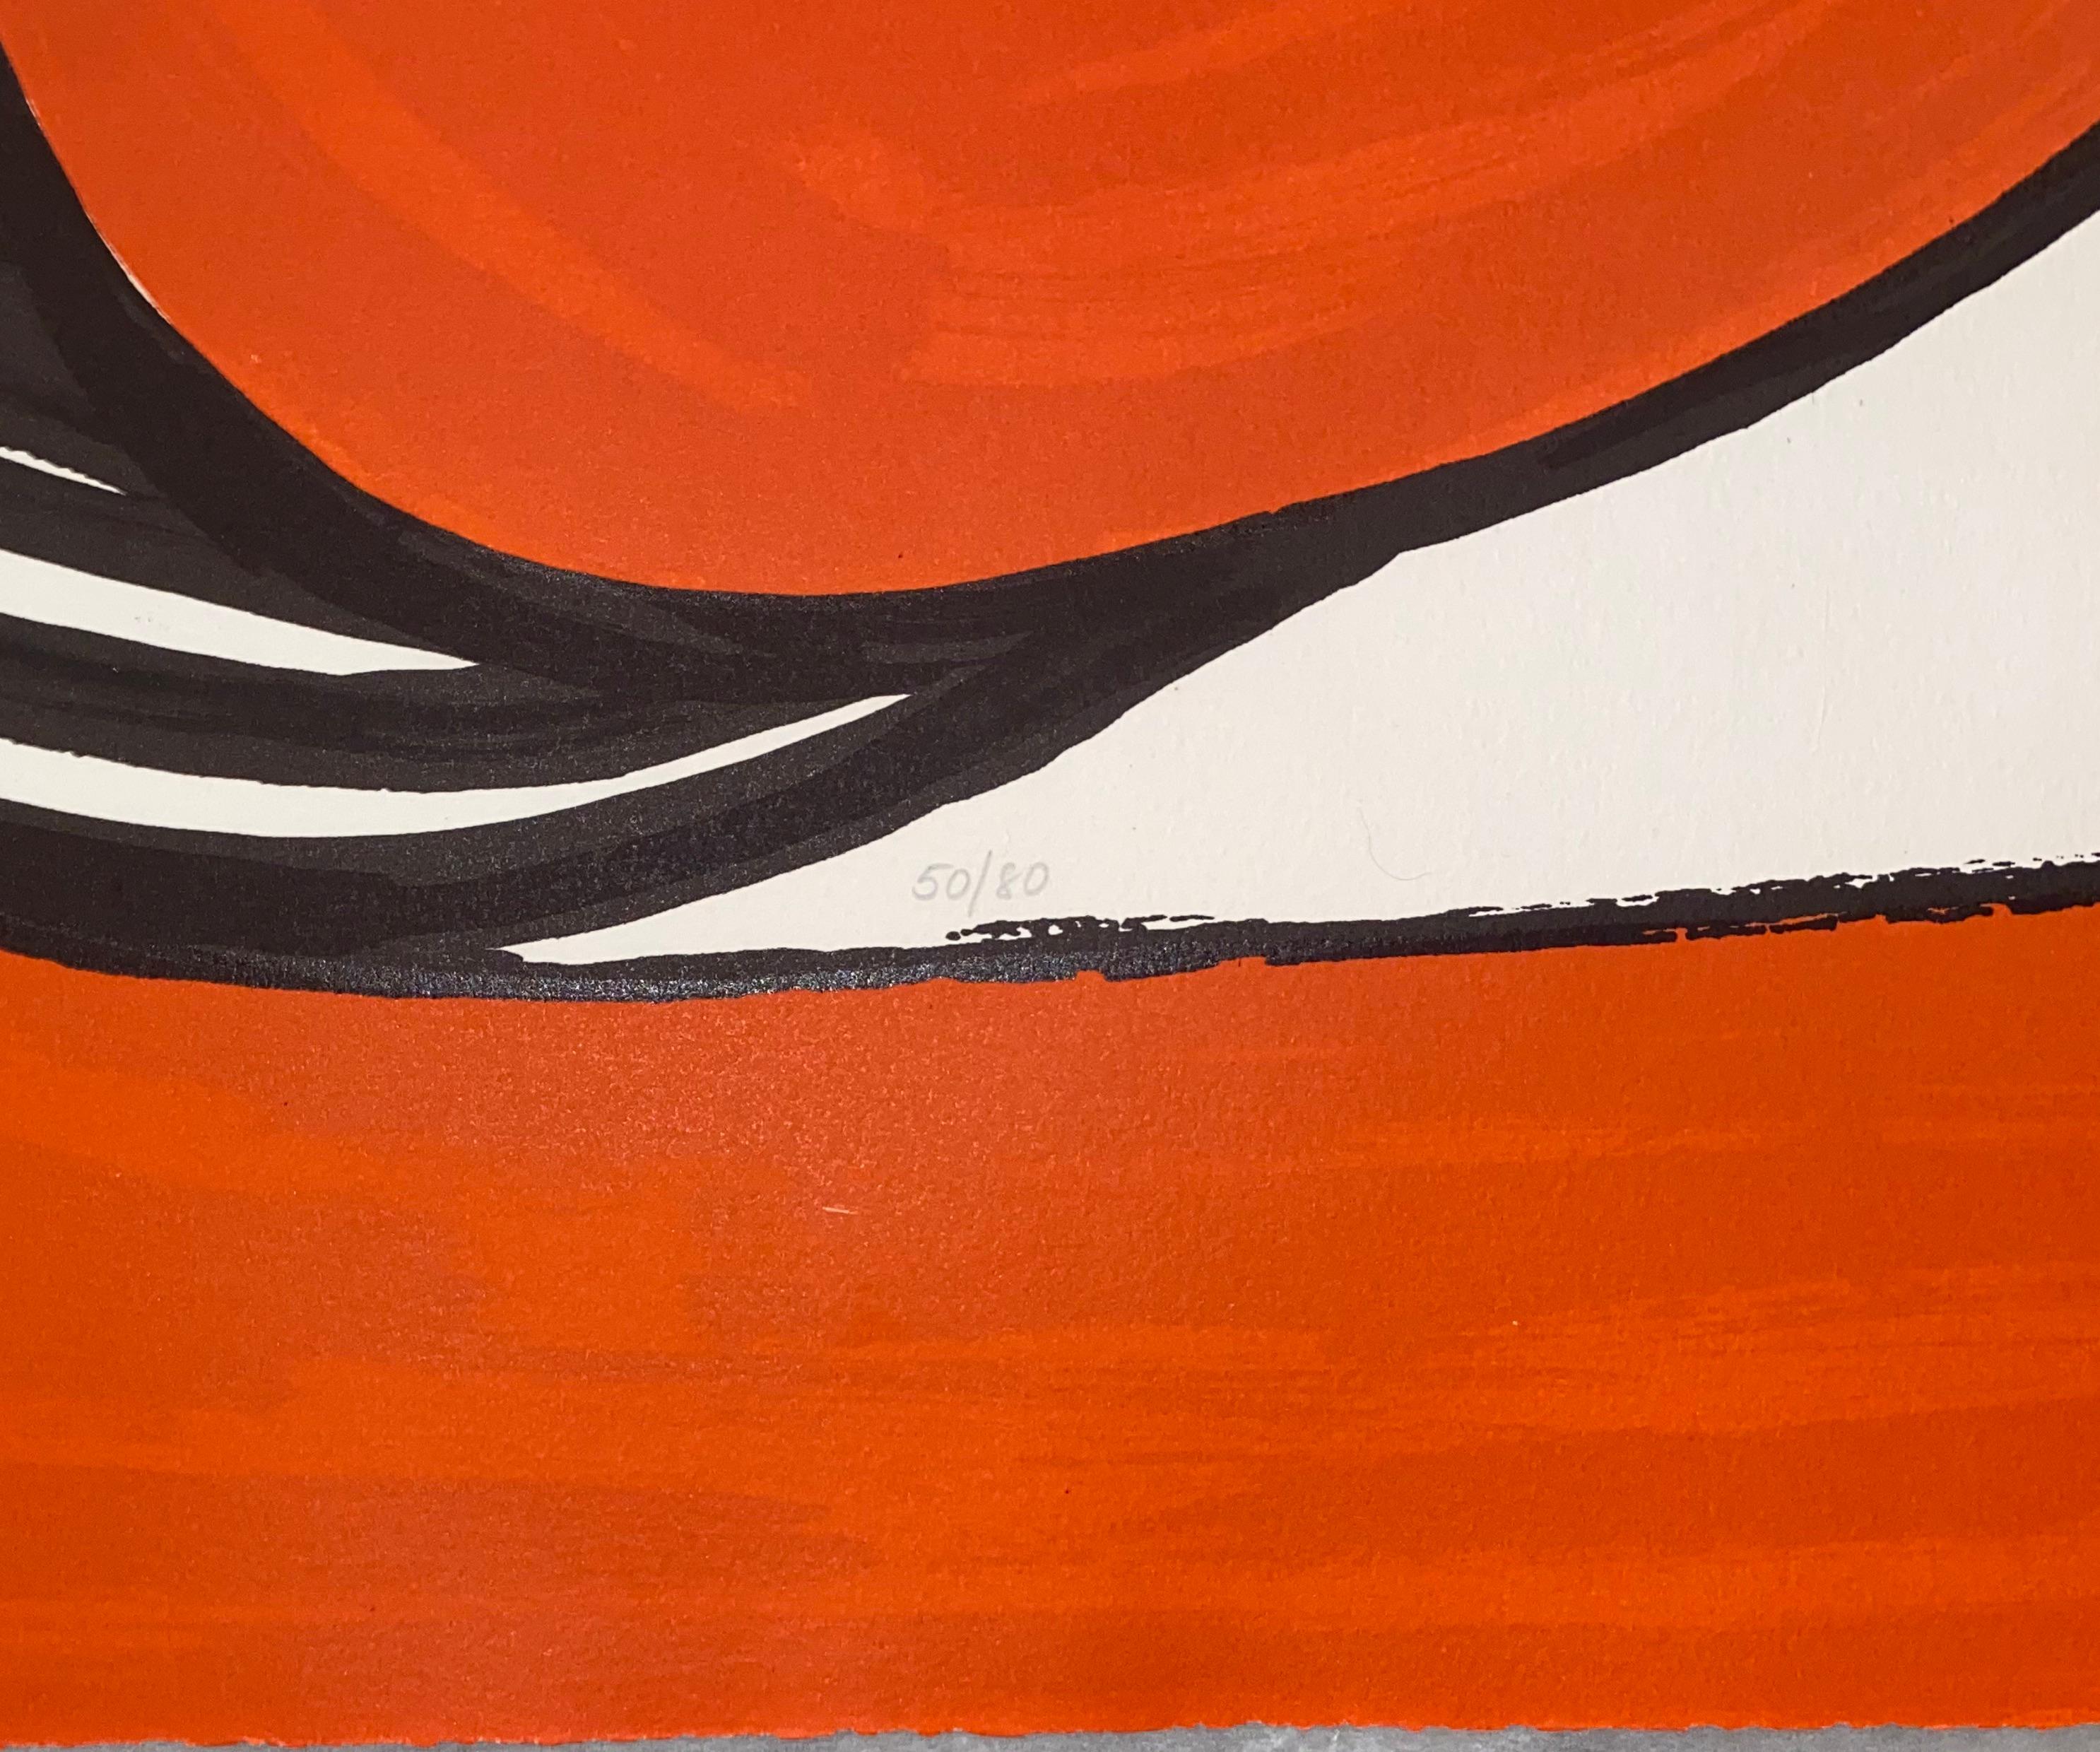 Alexander Calder (American, 1898-1976)
Signed: Calder (Lower, Right)
Discs and Spirals, 1970
Lithograph in Colors on Wove Paper
Sheet Size: 26” x 38”
Numbered: Numbered from an edition of 80

This piece is in excellent condition. It has been